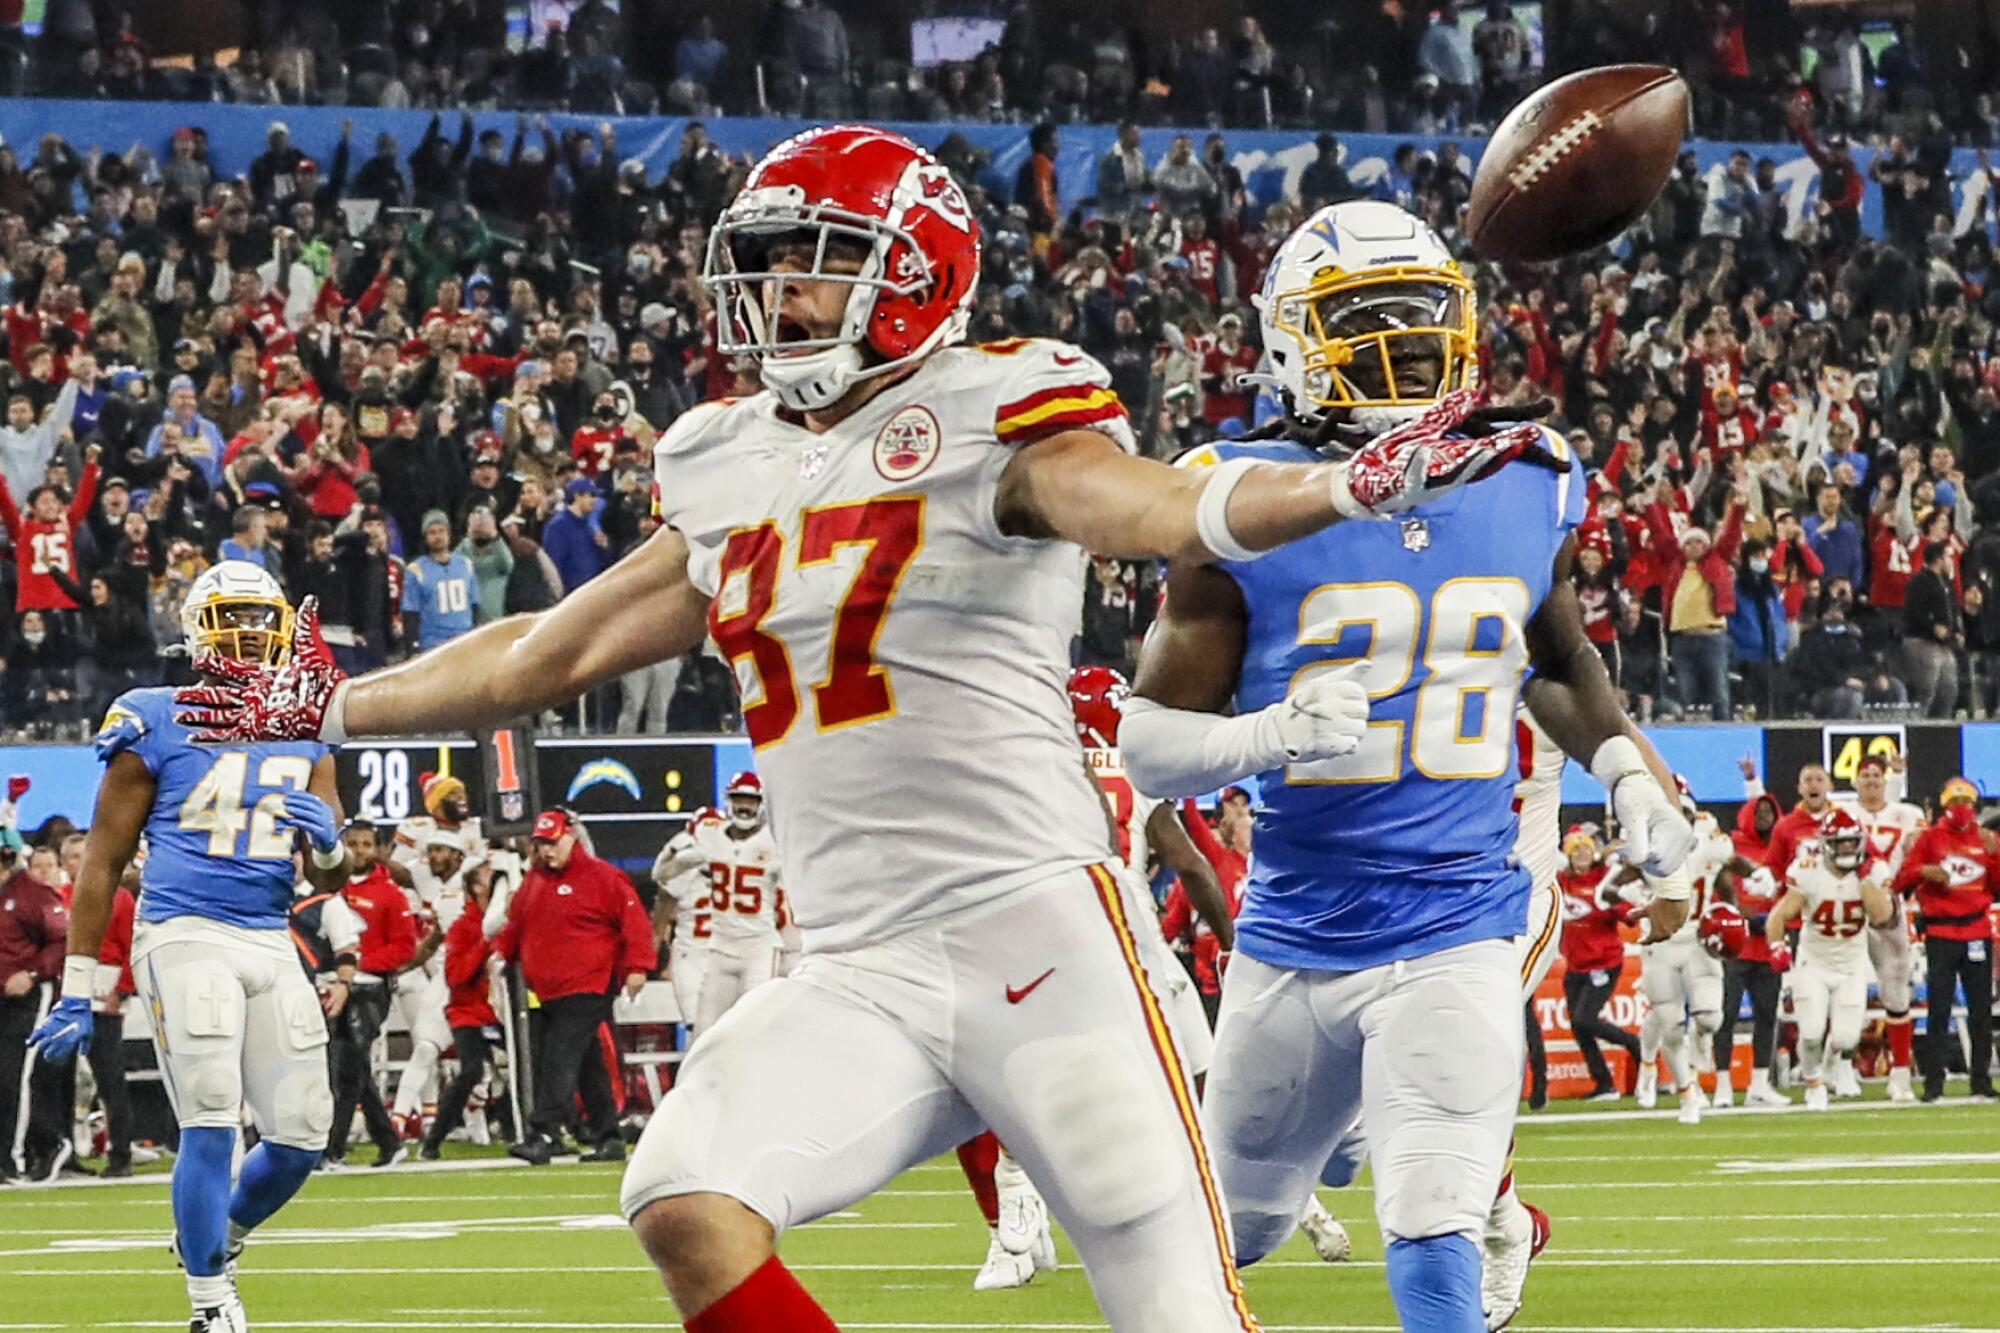 Kansas City tight end Travis Kelce scores the winning touchdown in front of Chargers cornerback Davontae Harris.